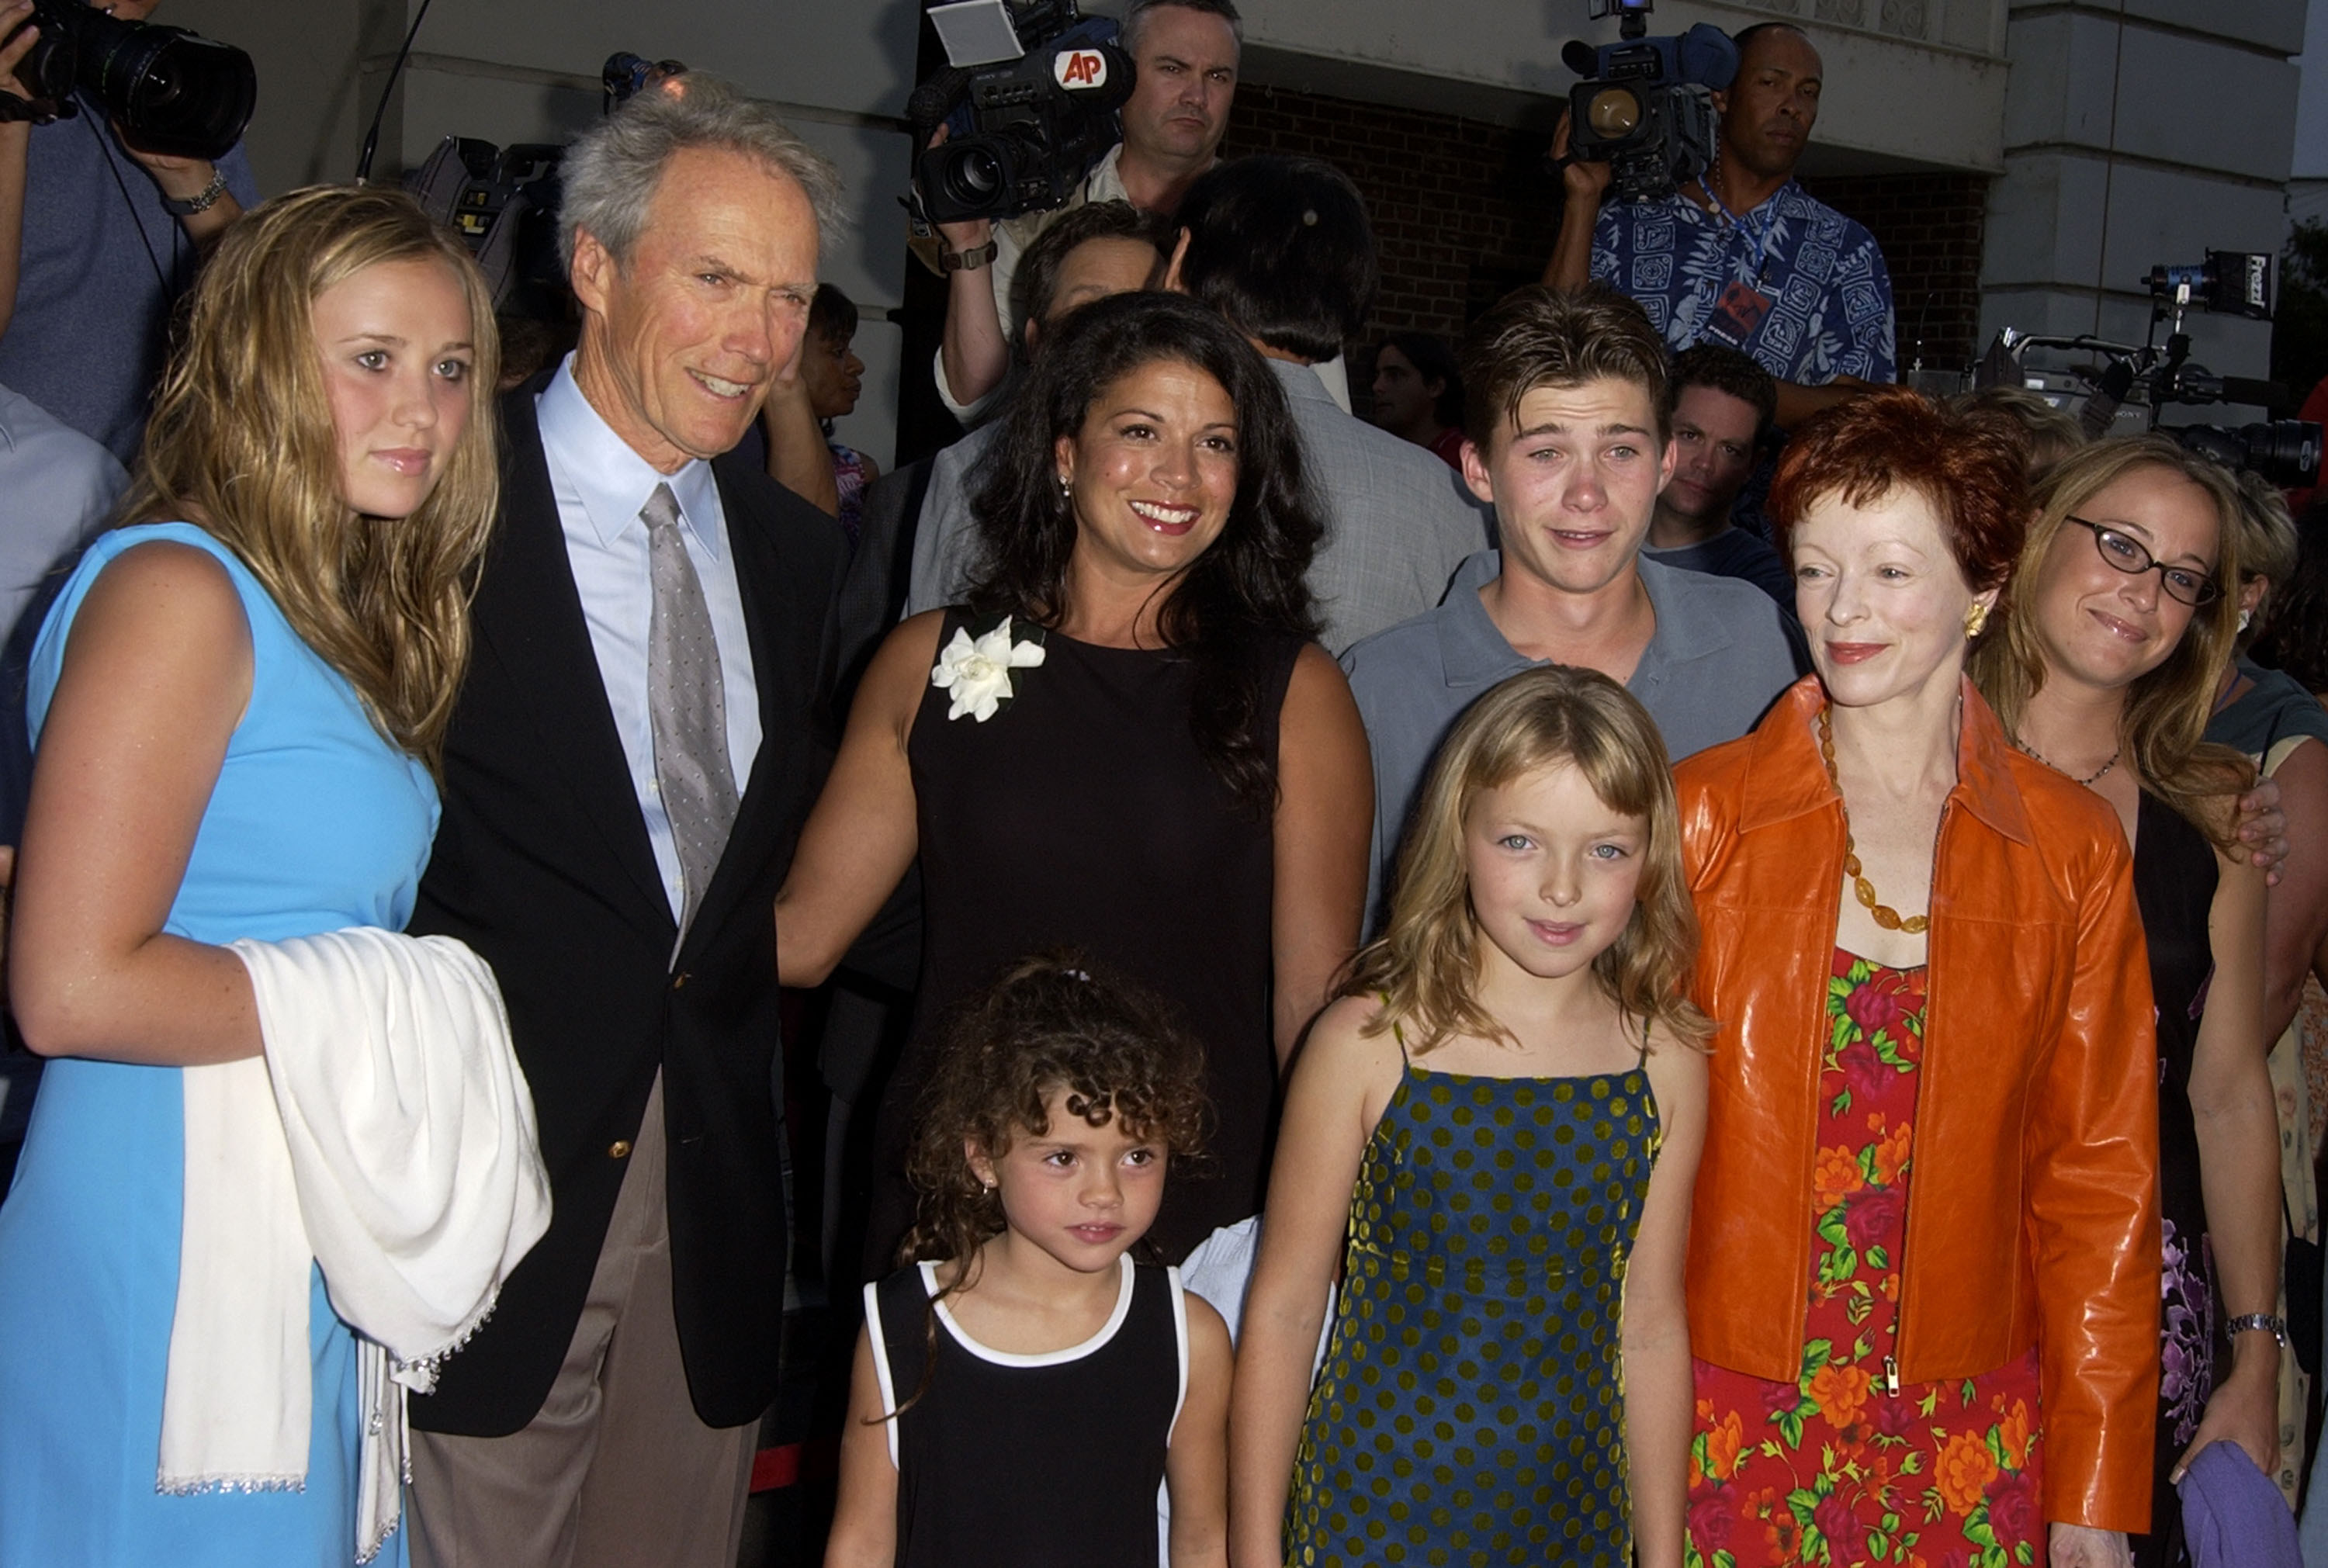 Clint poses with some of his children at an event